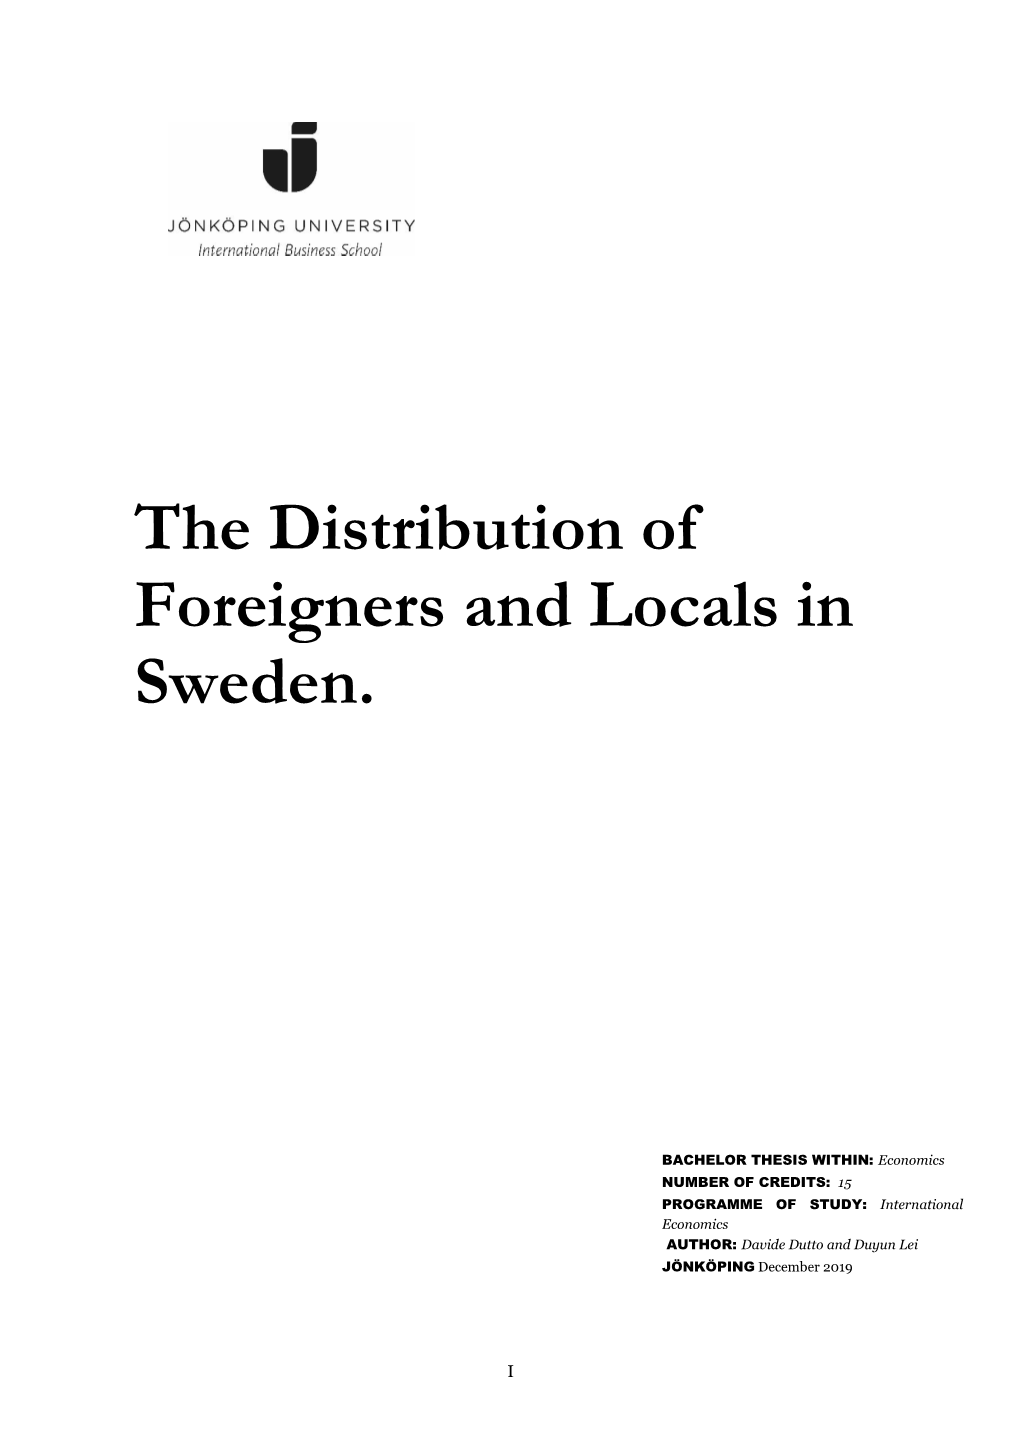 The Distribution of Foreigners and Locals in Sweden